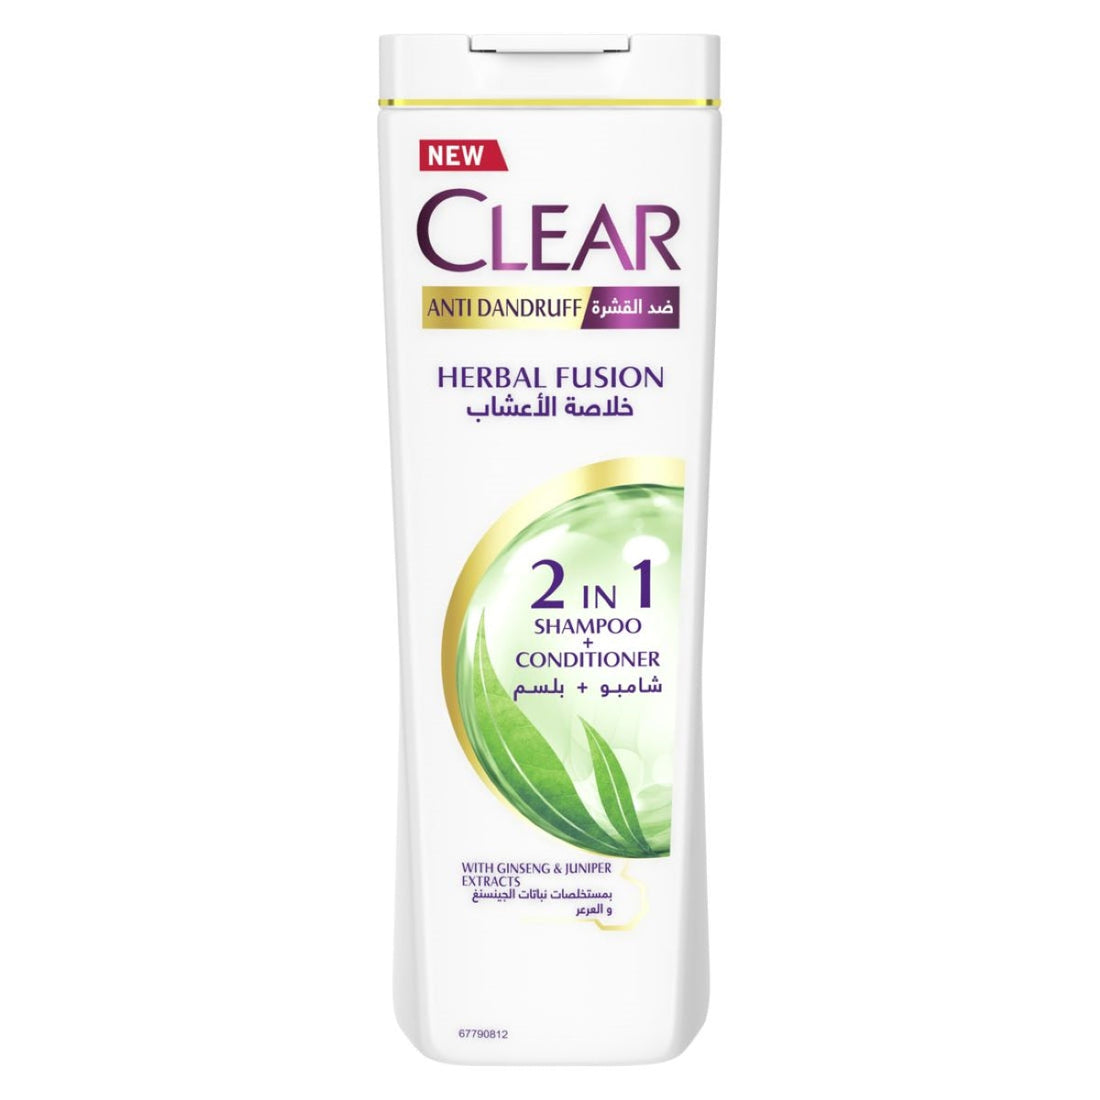 Clear Shampoo Herbal Fusion For Male